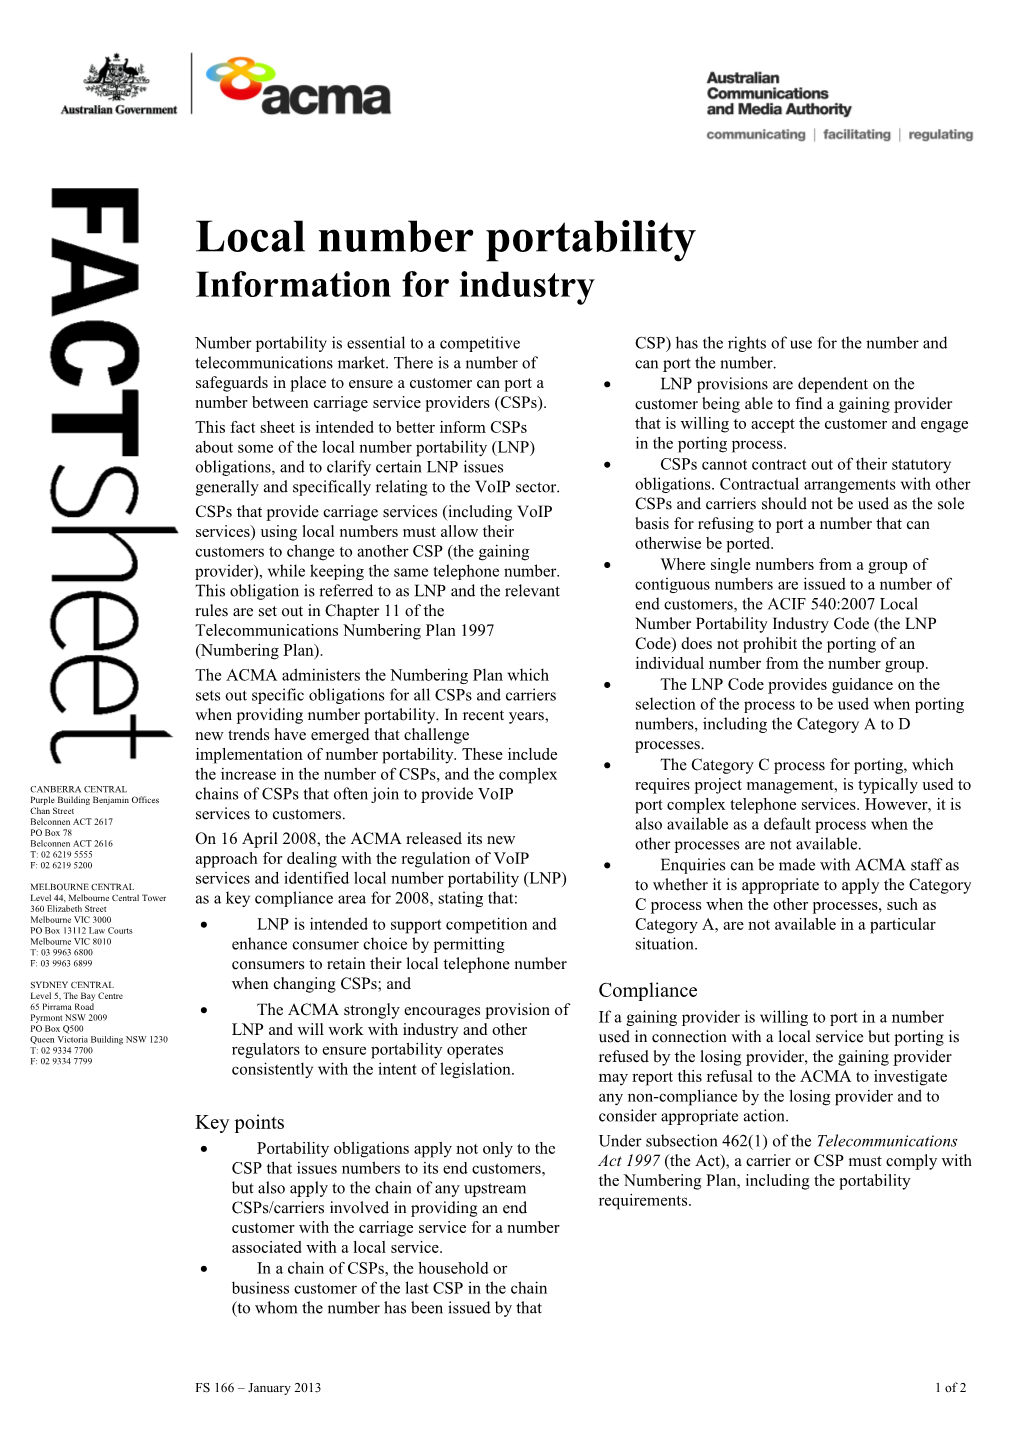 FS166 Local Number Portability - Information for Industry